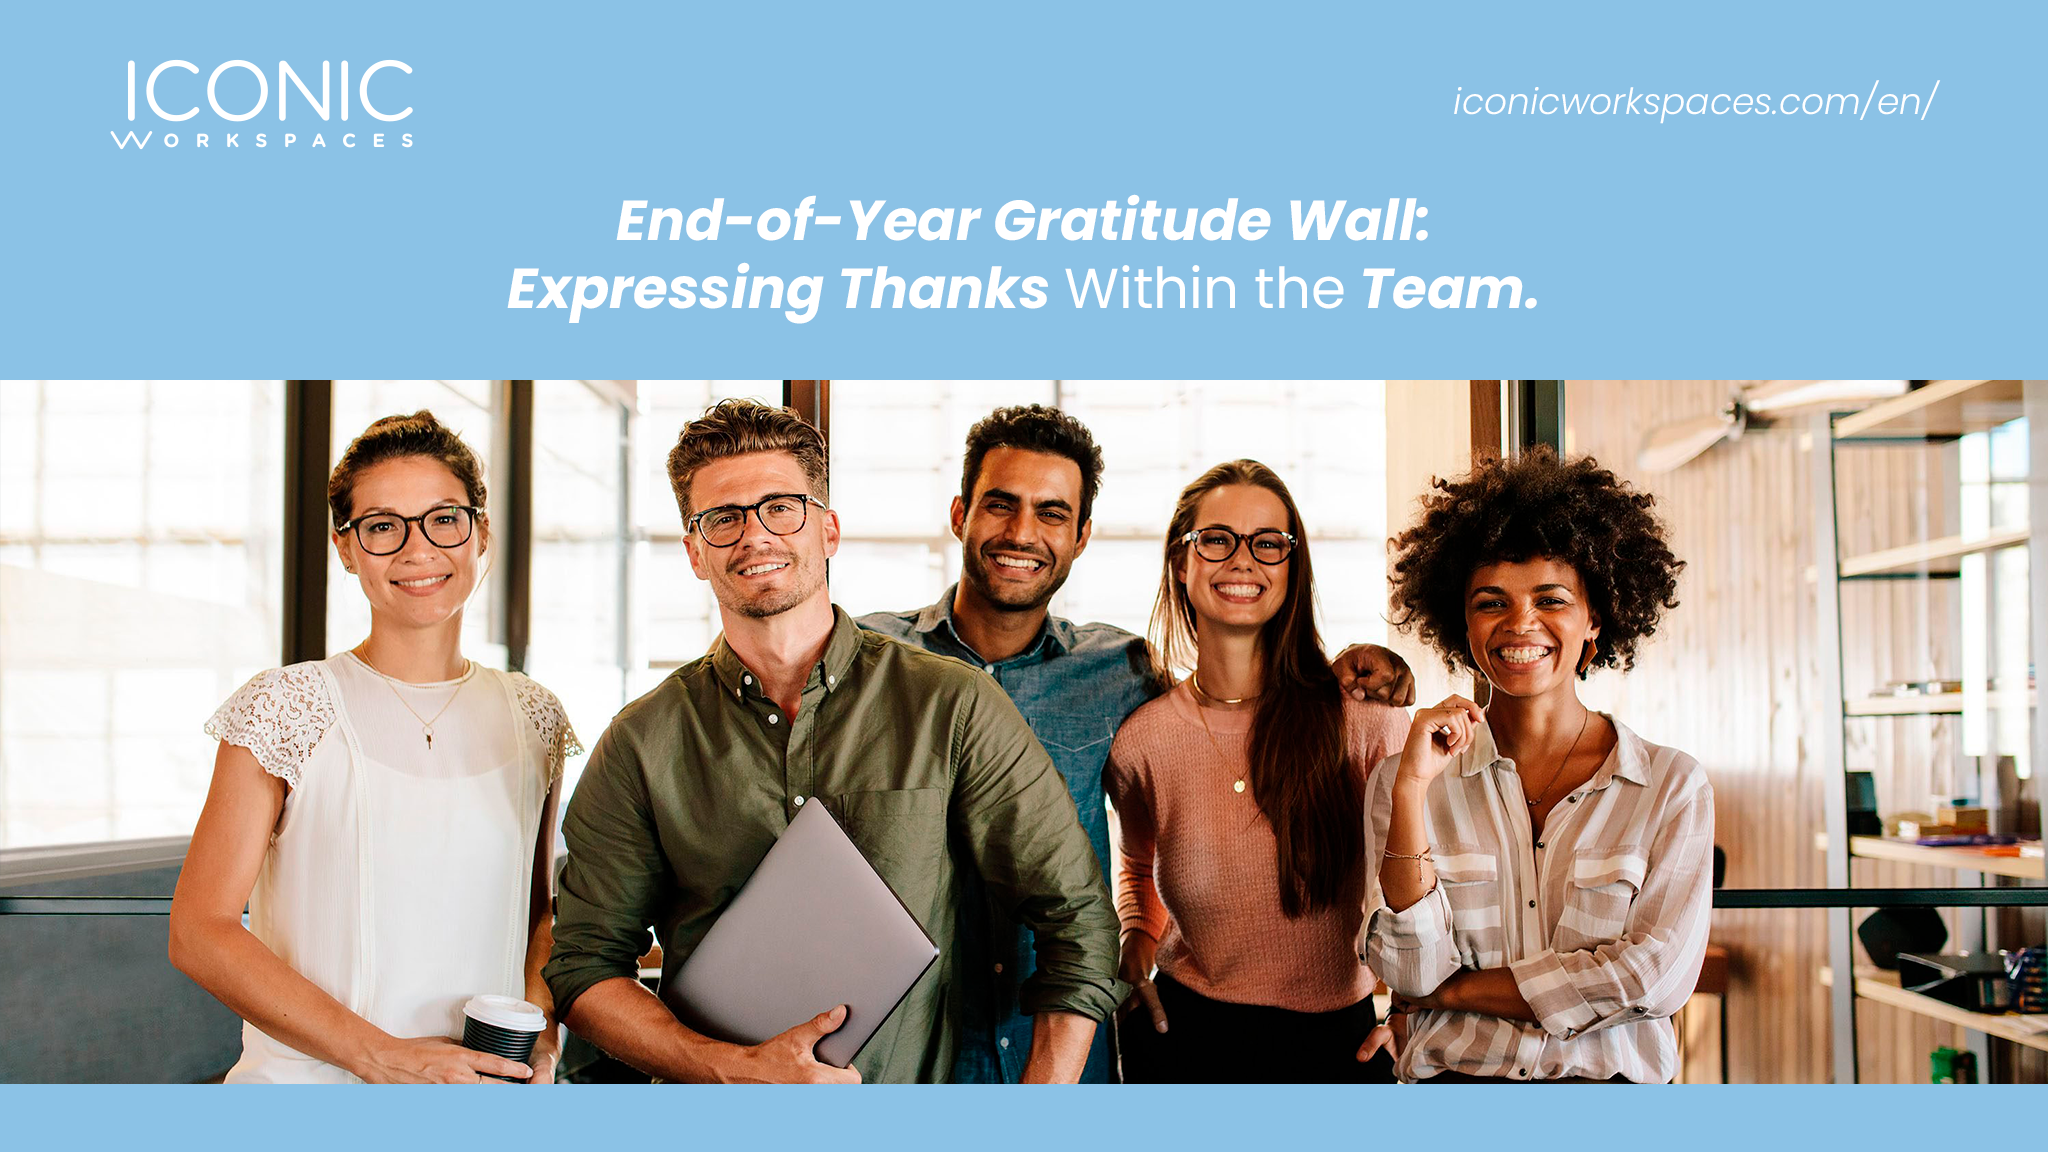 End-of-Year Gratitude Wall: Expressing Thanks Within the Team